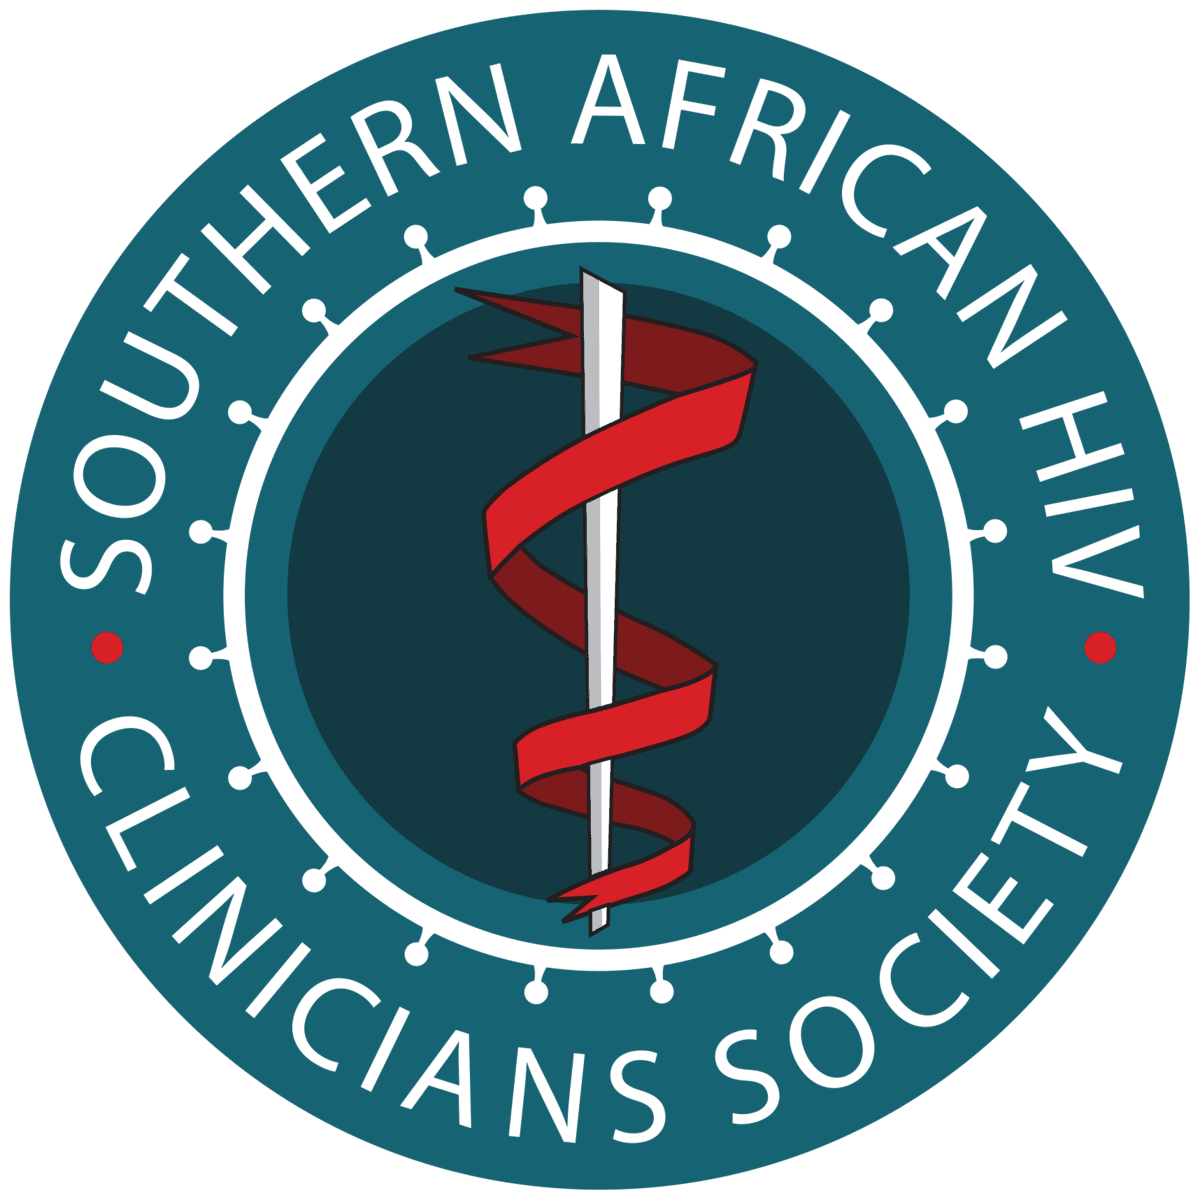 Southern African HIV Clinicians Society